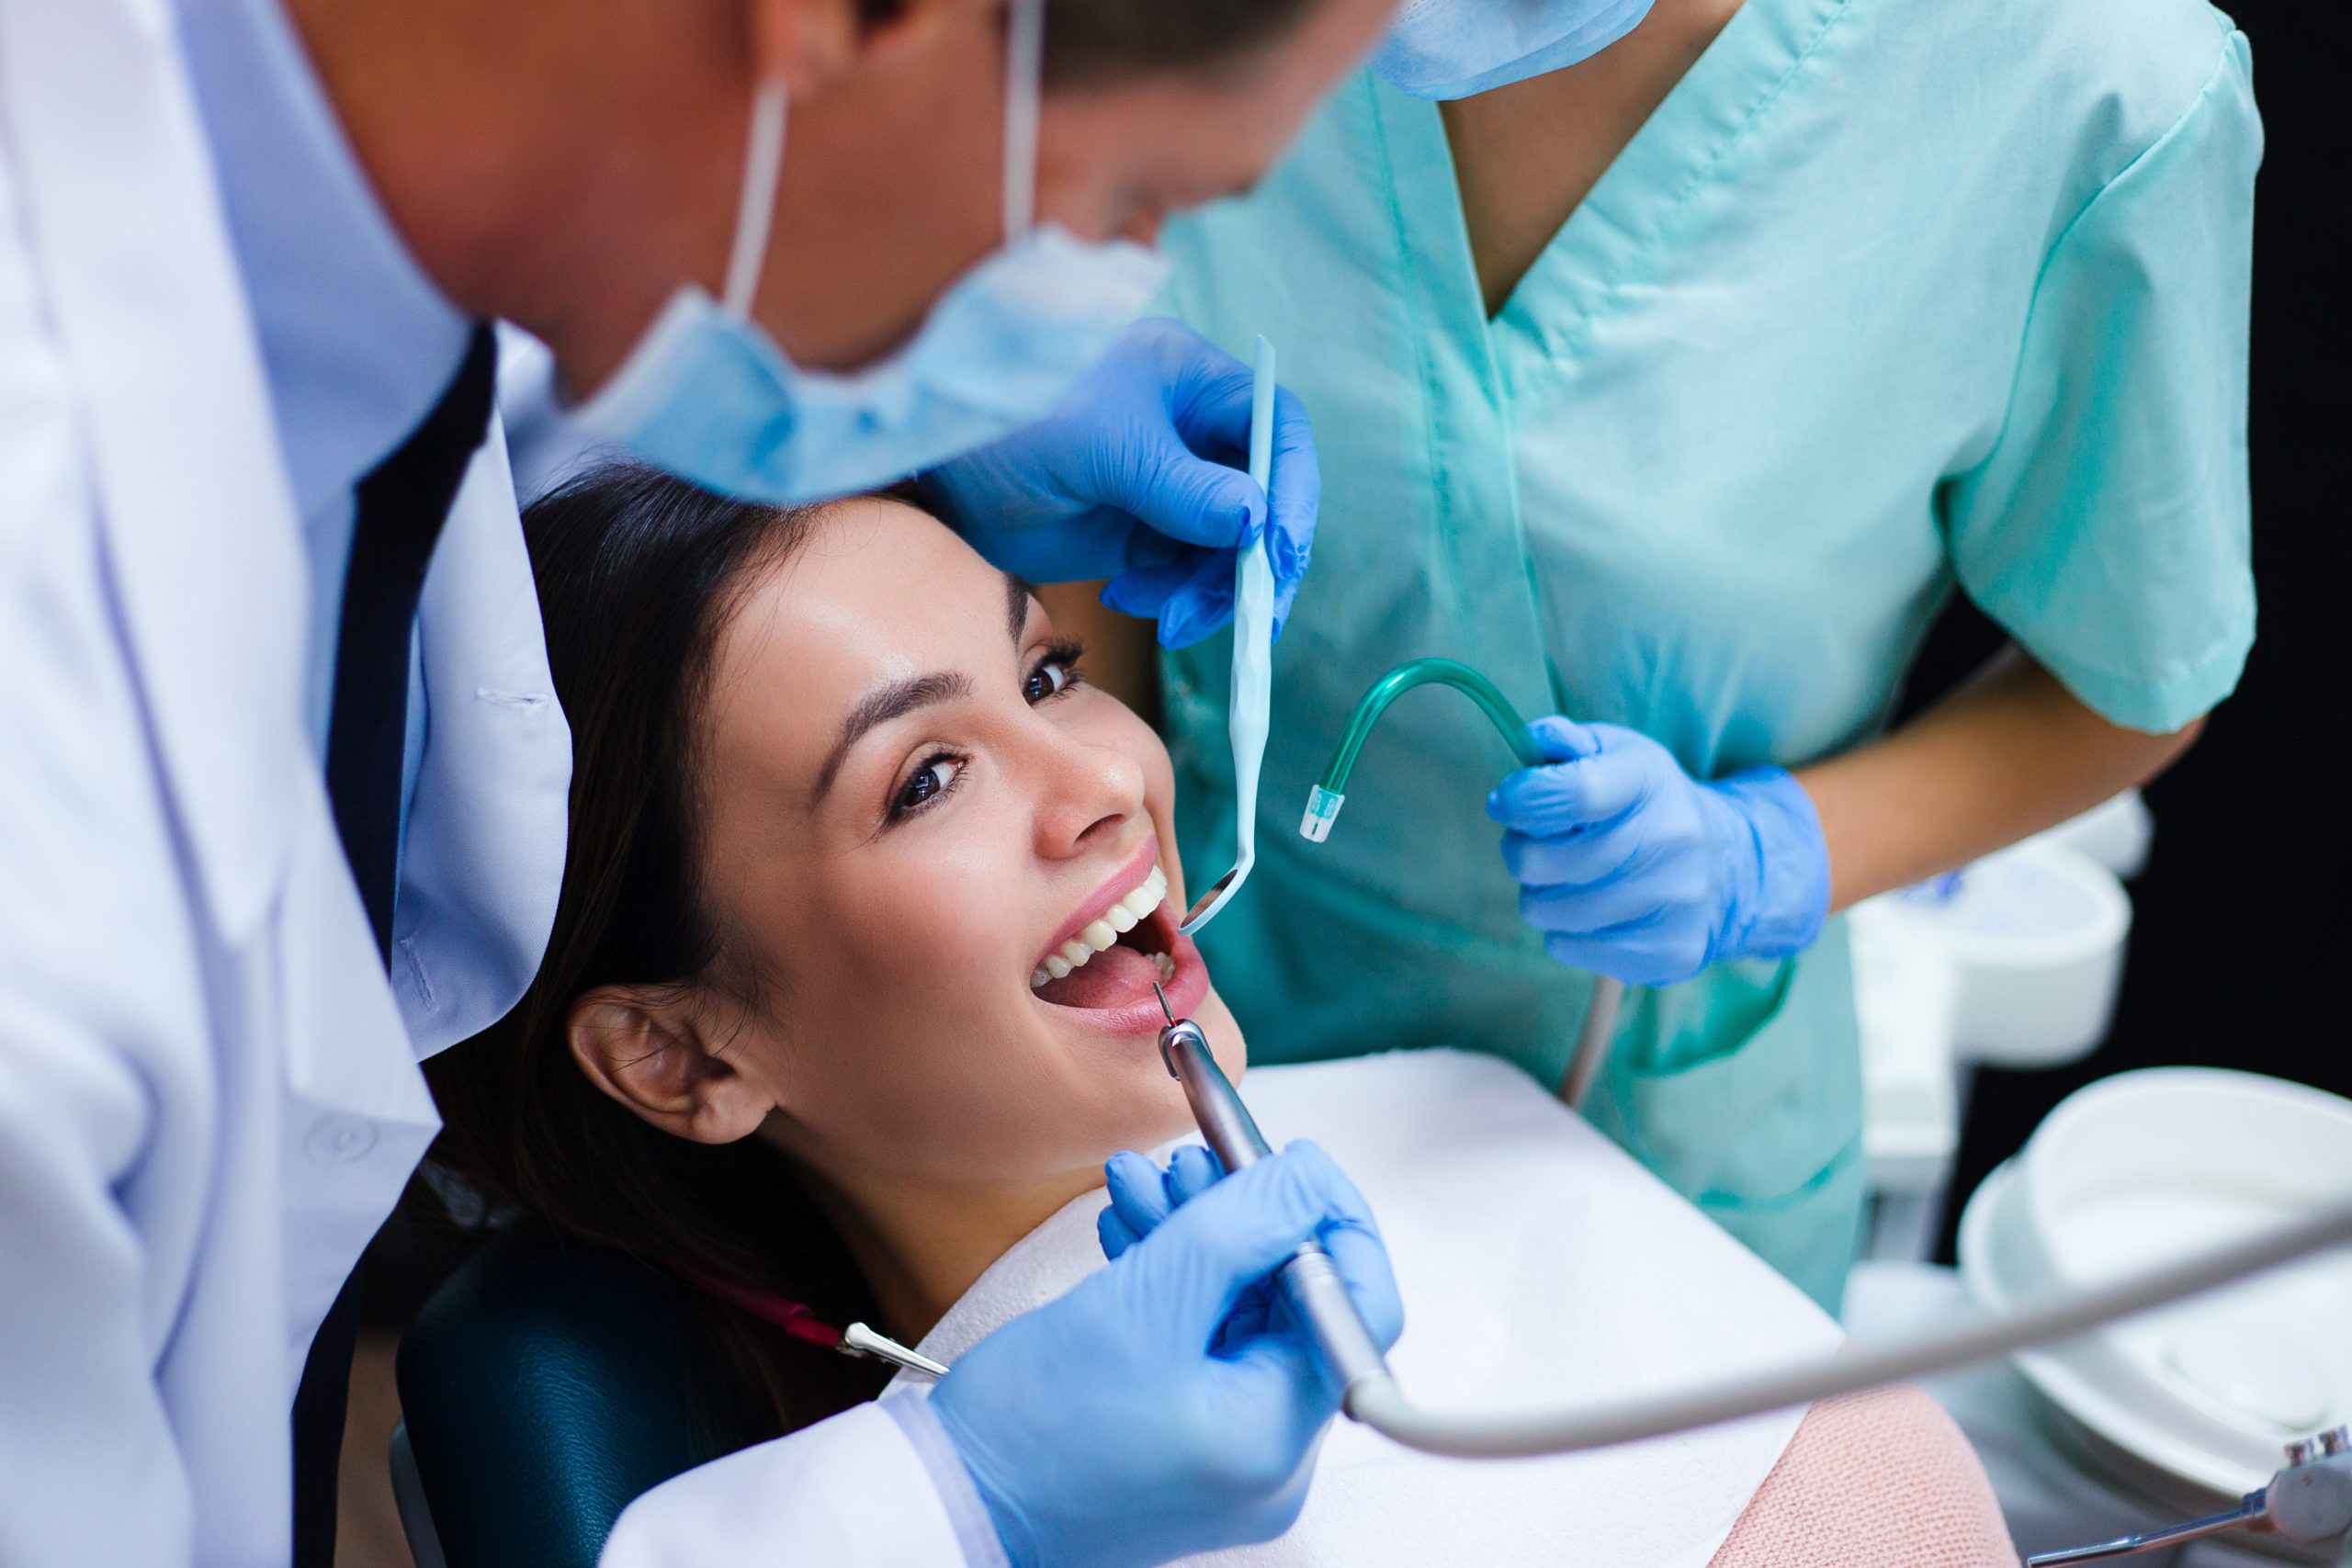 Woman smiling during a dental procedure